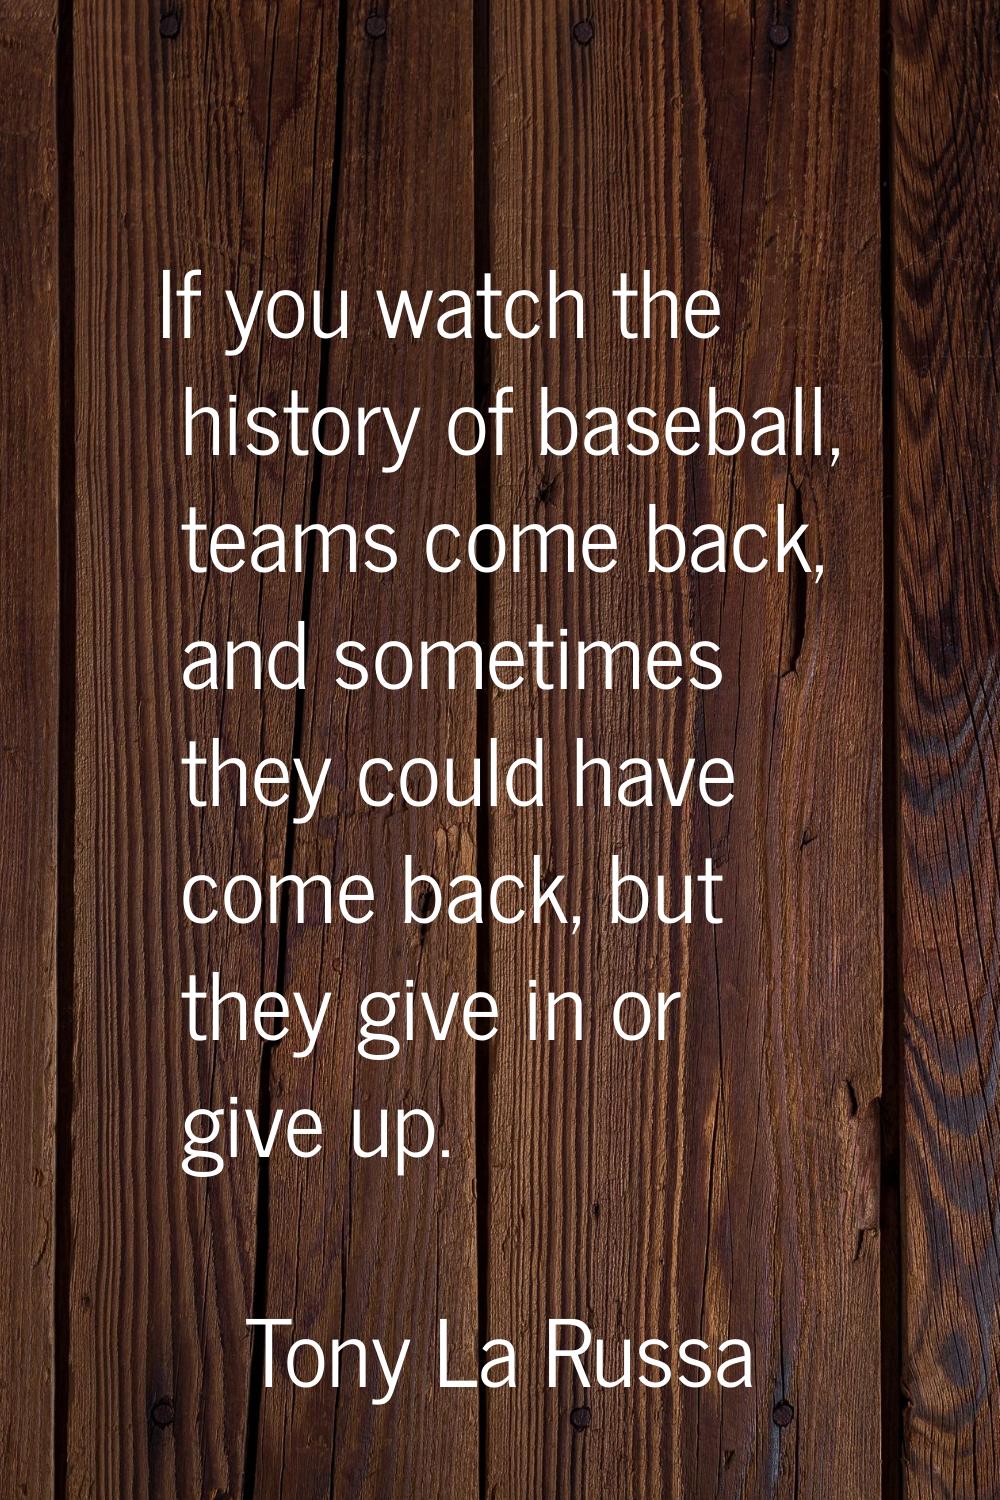 If you watch the history of baseball, teams come back, and sometimes they could have come back, but